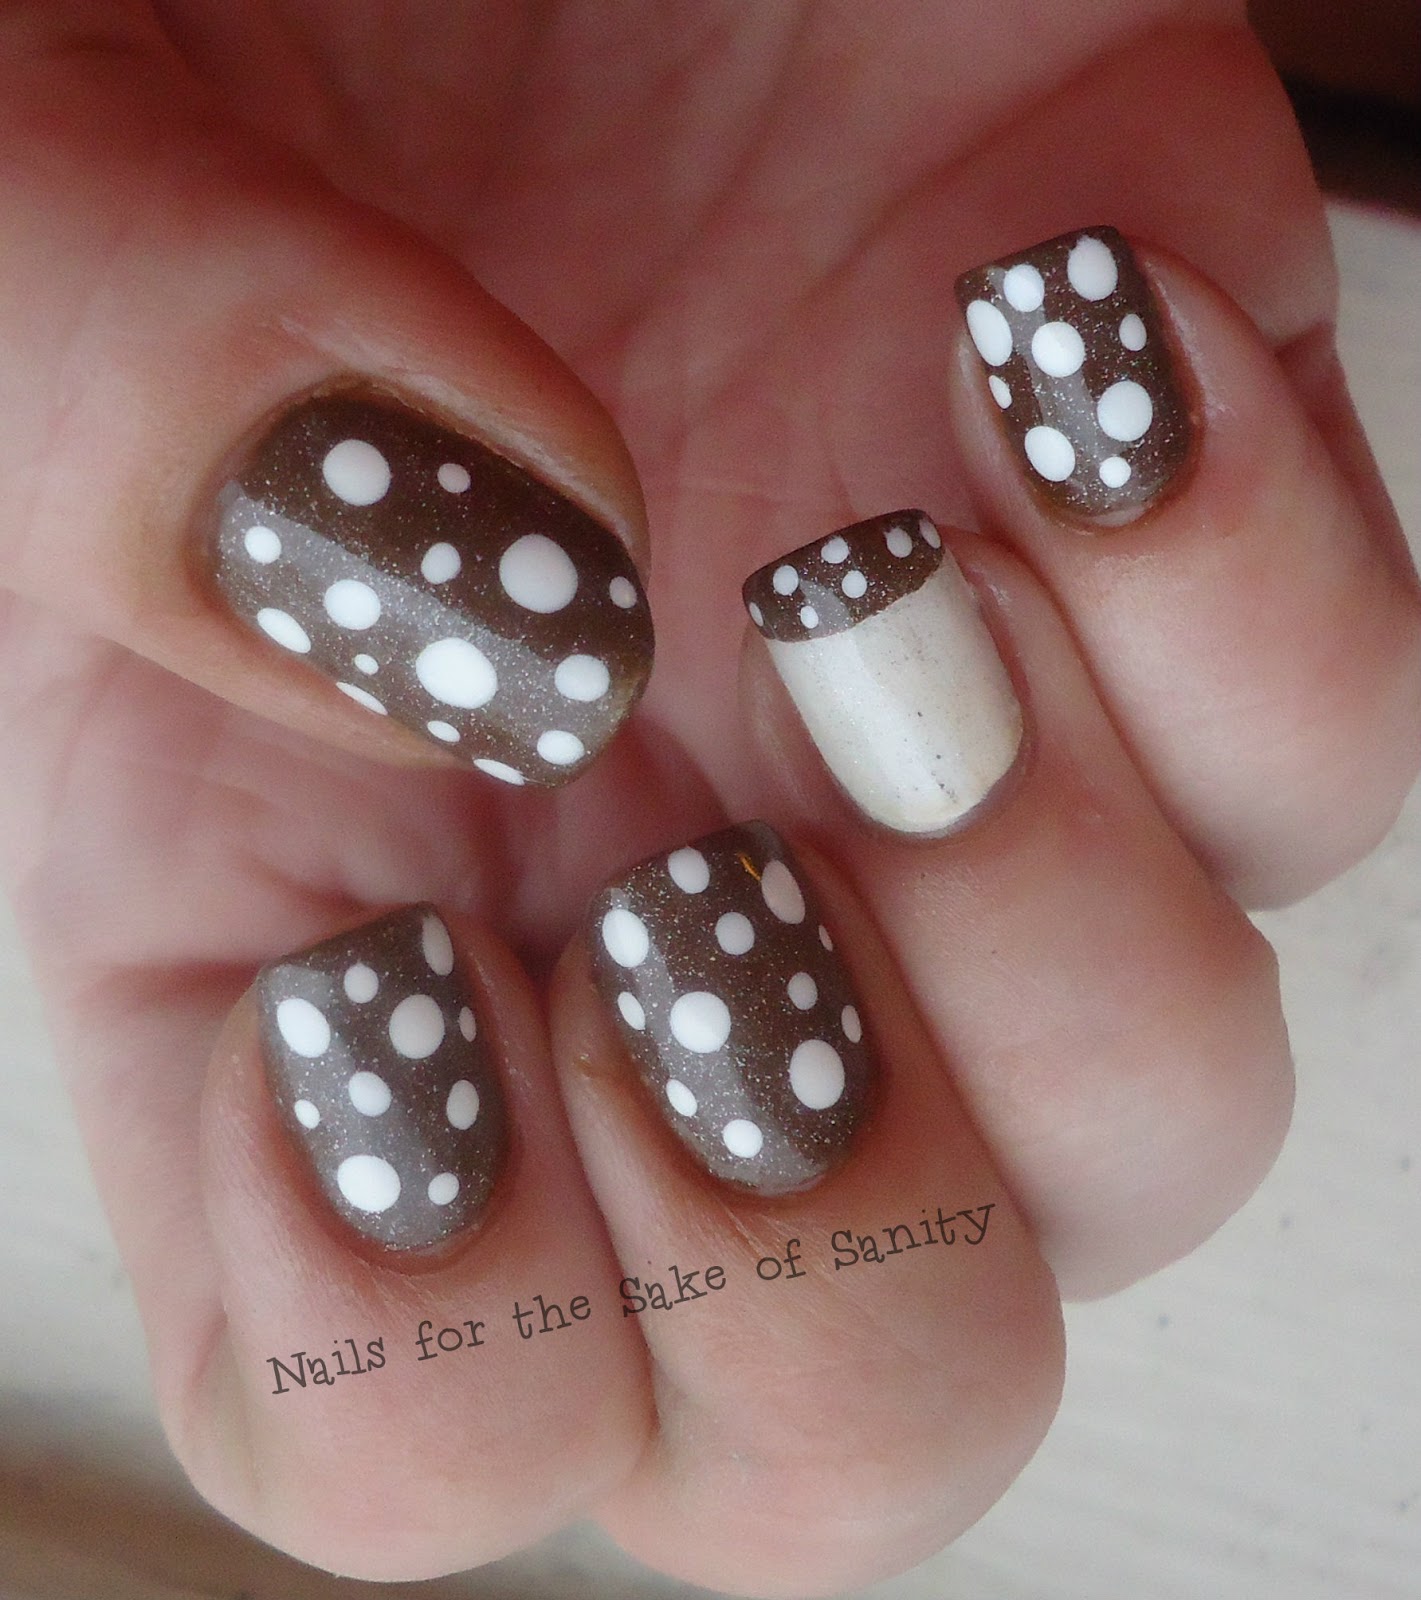 Nails for the Sake of Sanity: Let it Snow Challenge: Day 10 - Hot Chocolate